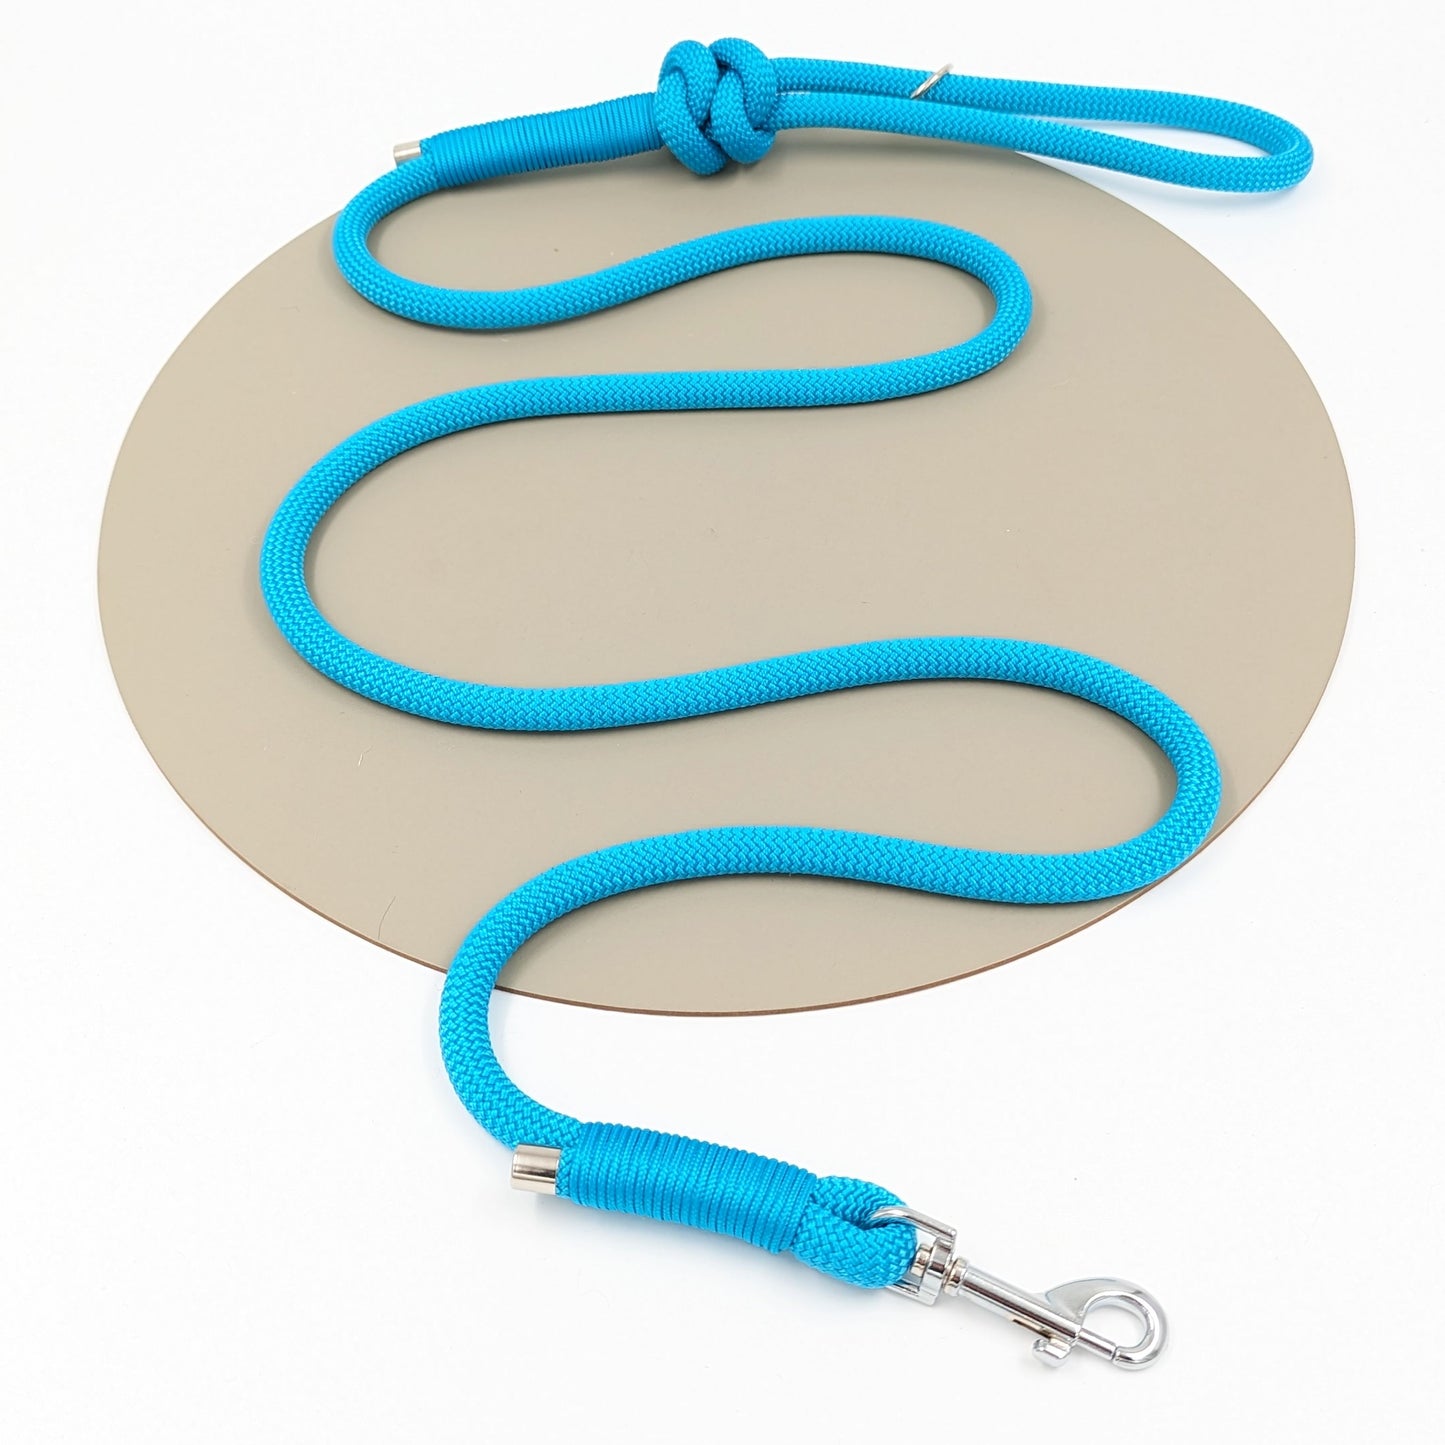 Woodle Octoknot rope lead - Design your own